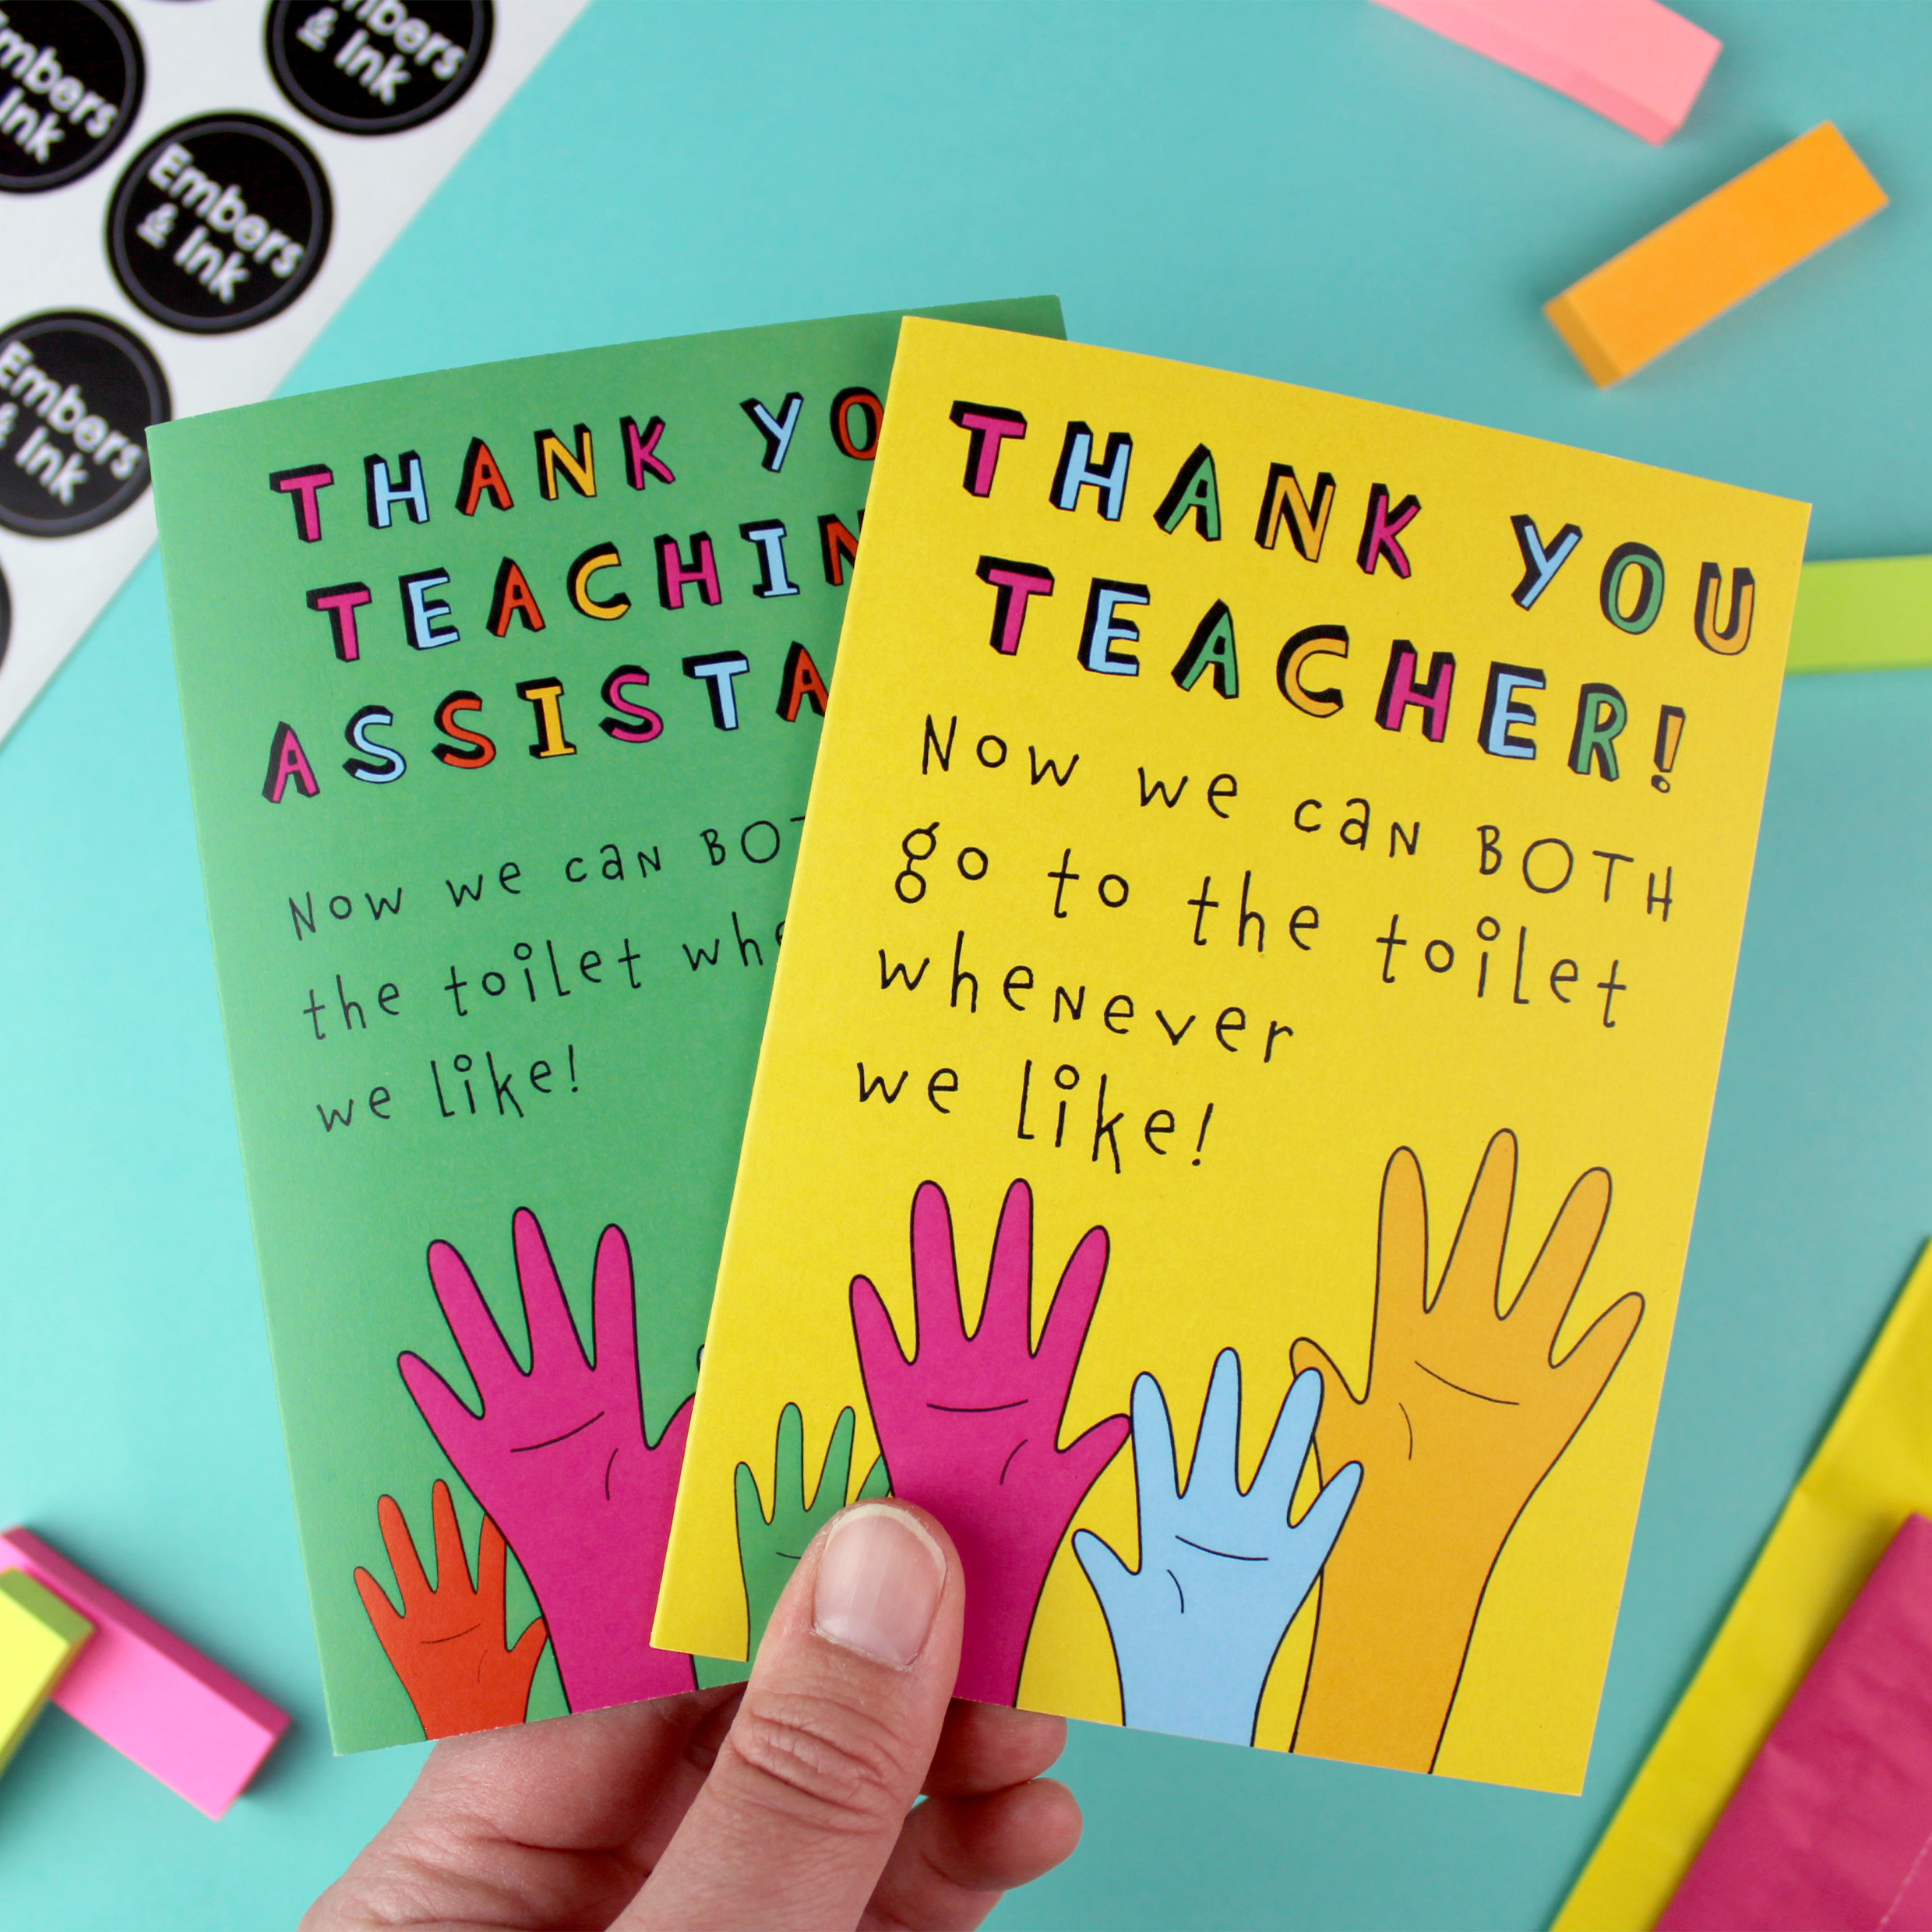 A hand holds two greetings cards, one with a green background and one with a yellow background. Both have an illustration of raised hands of various colours. The yellow card reads Thank You Teacher now we can both go to the toilet whenever we like!. The green card says the same, but for a Teaching Assistant.